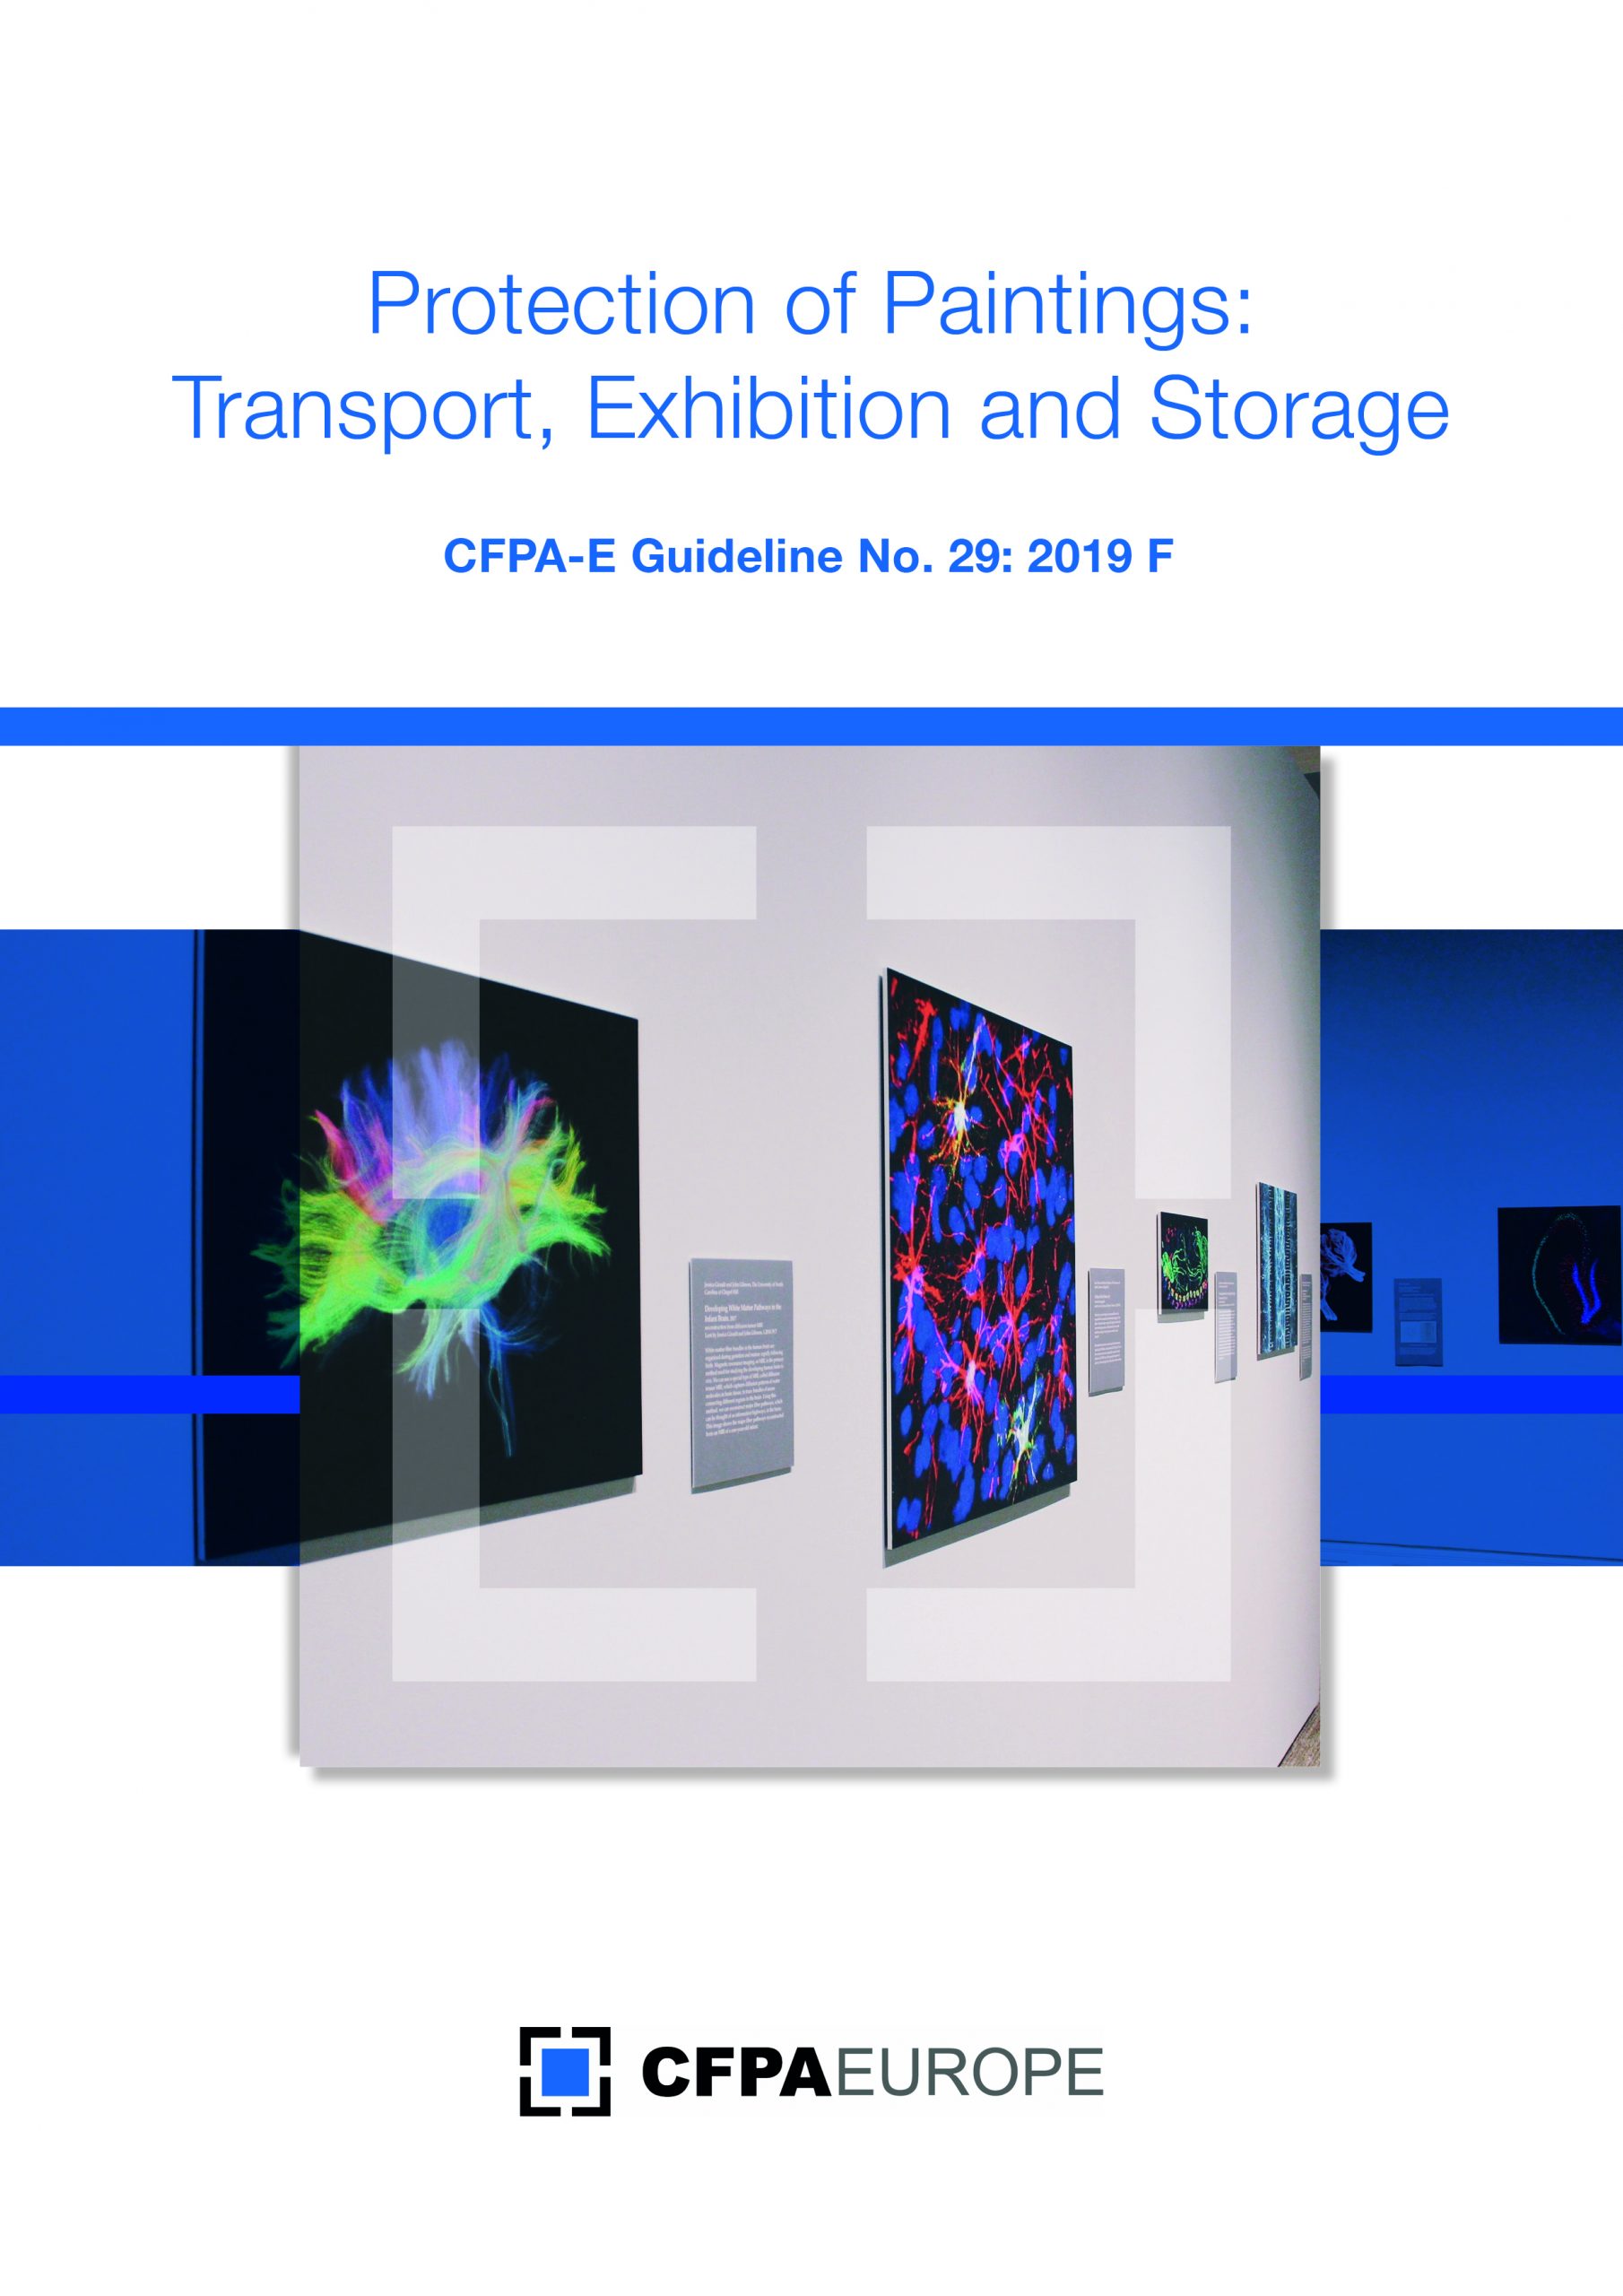 Protection of paintings: Transport, exhibition and storage